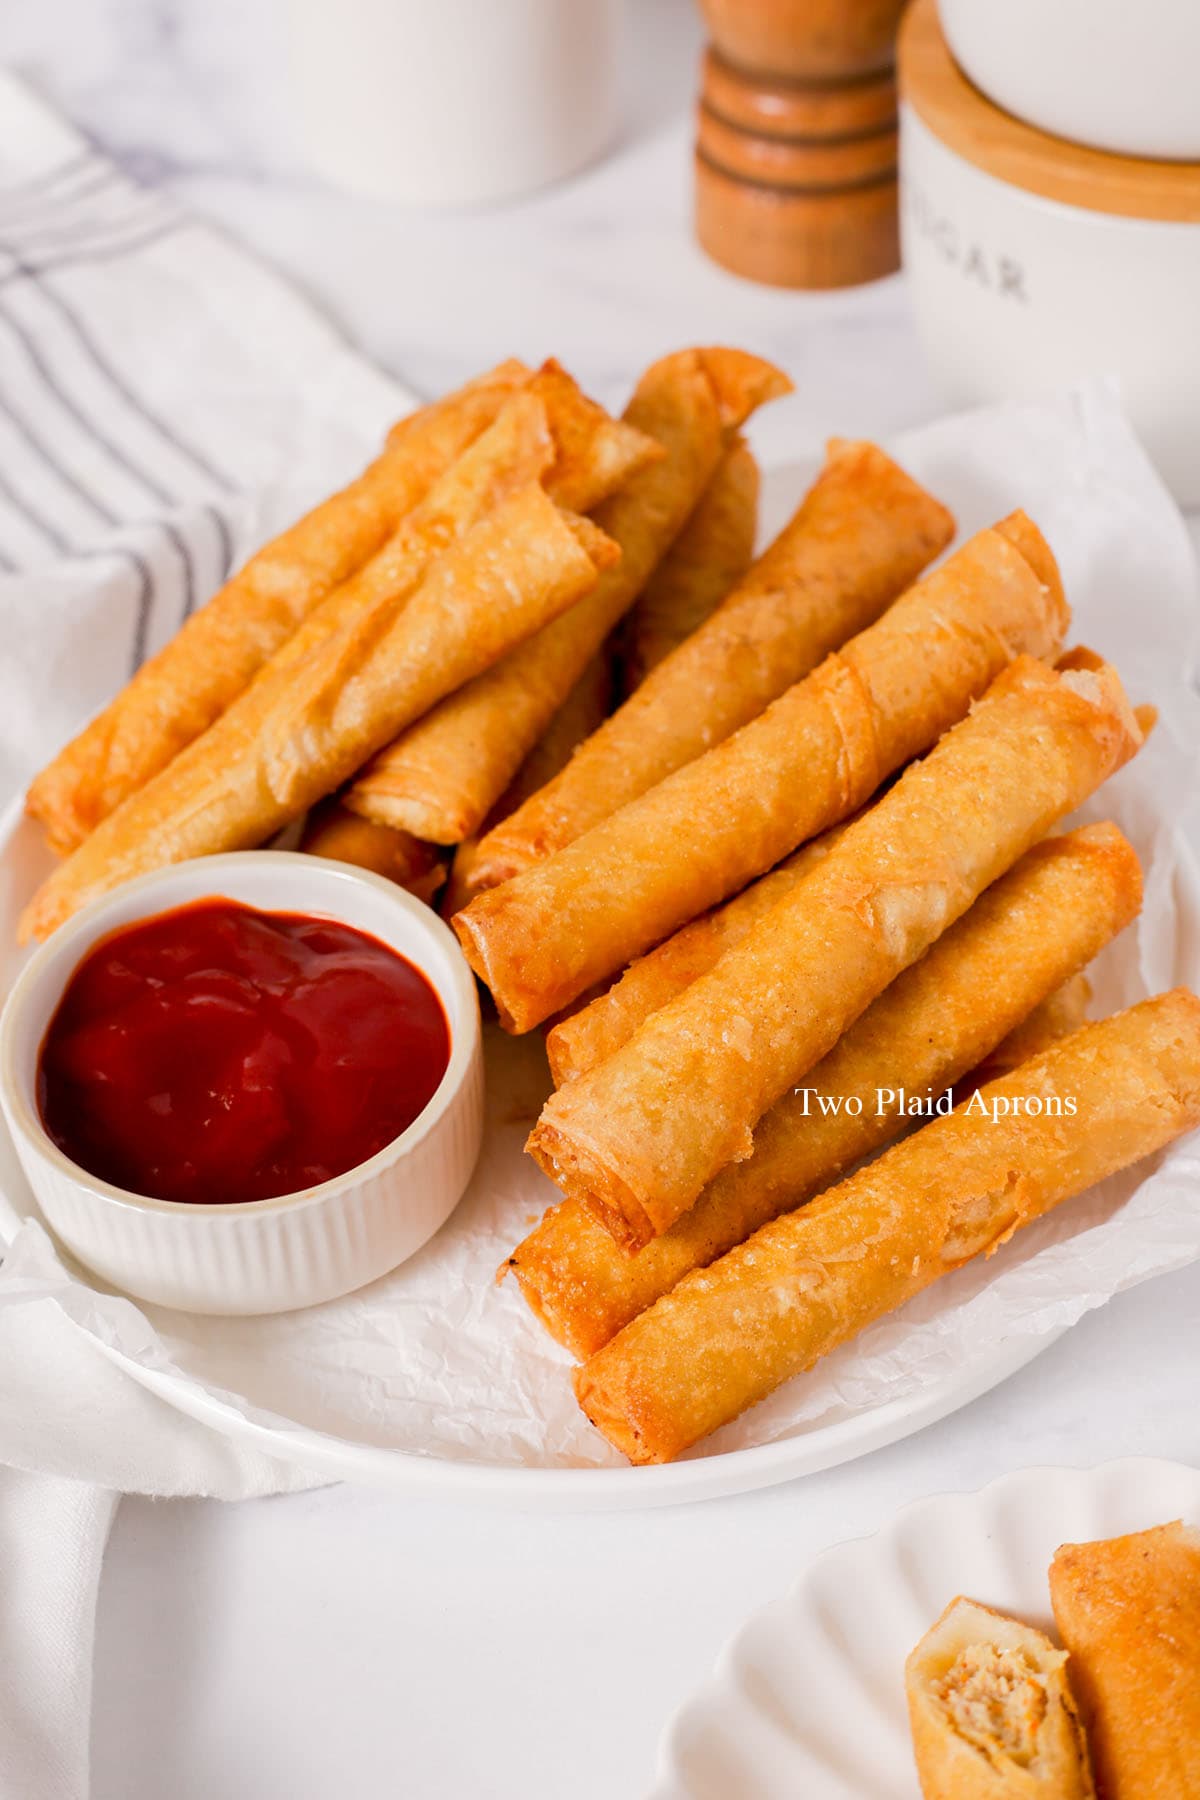 Lumpia fried and on the plate.